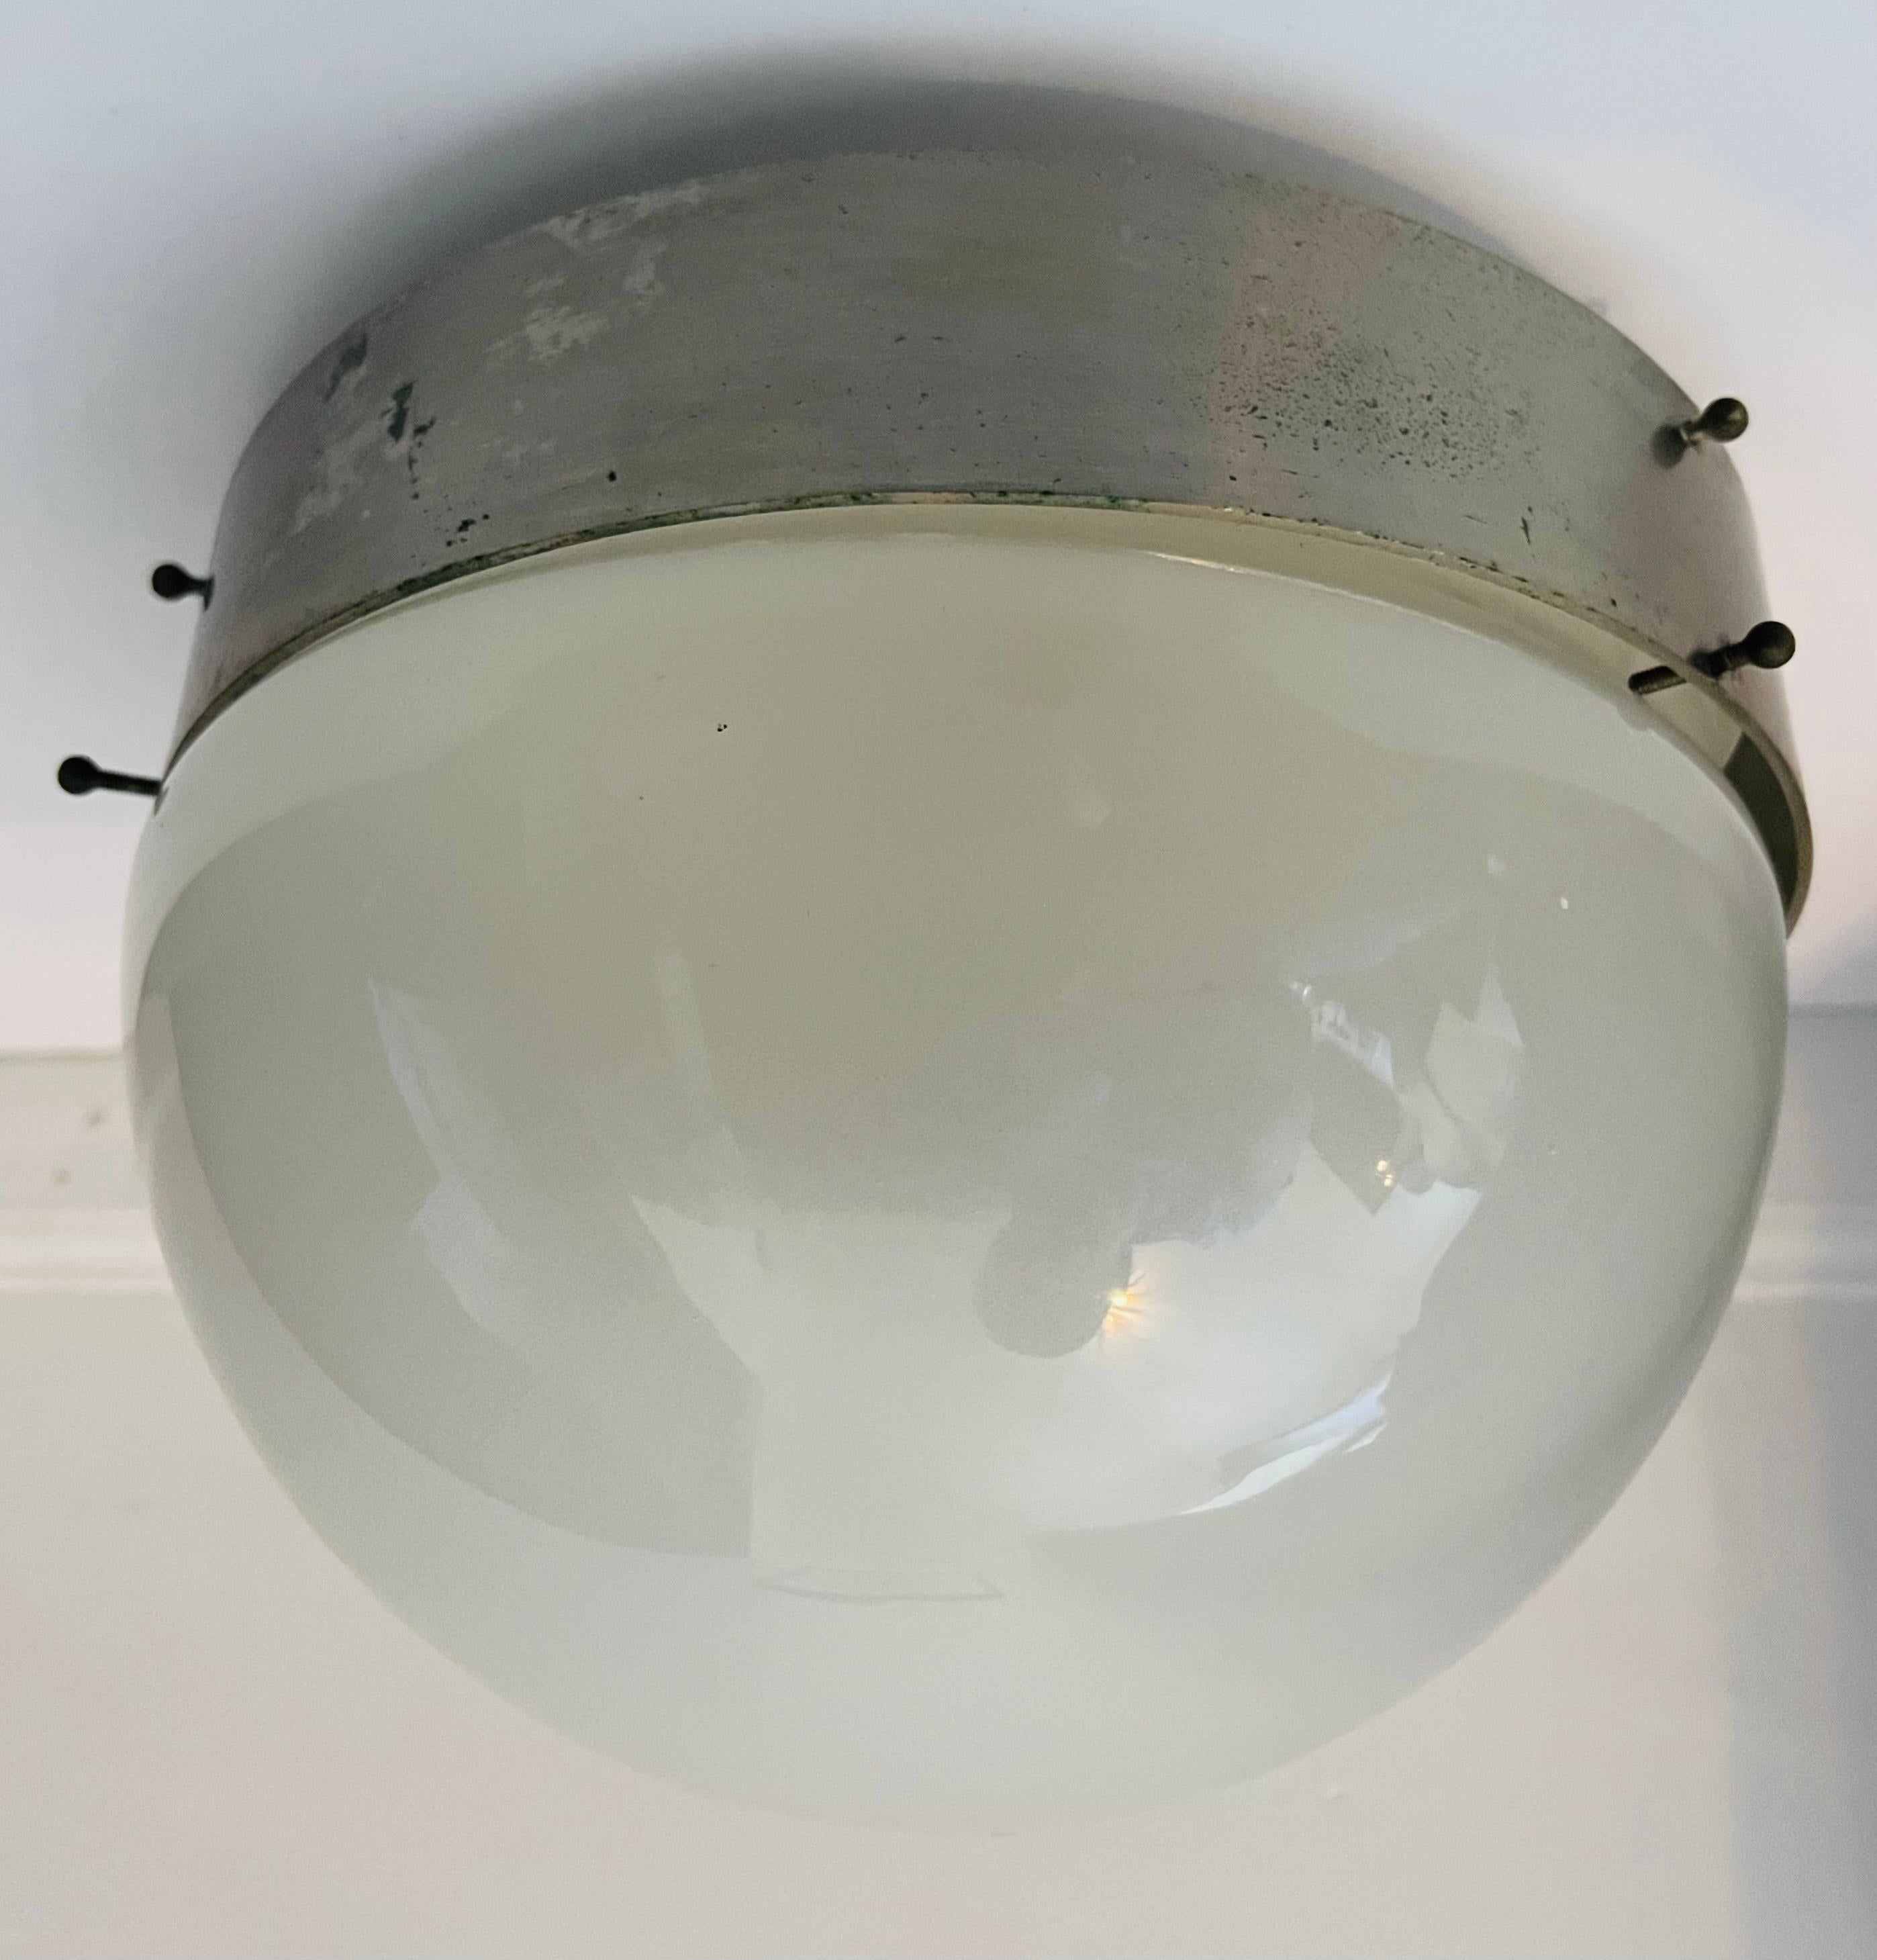 A 1960s modern industrial style flush ceiling light in aged brushed steel with a glossy white opaline glass shade. Rewired.